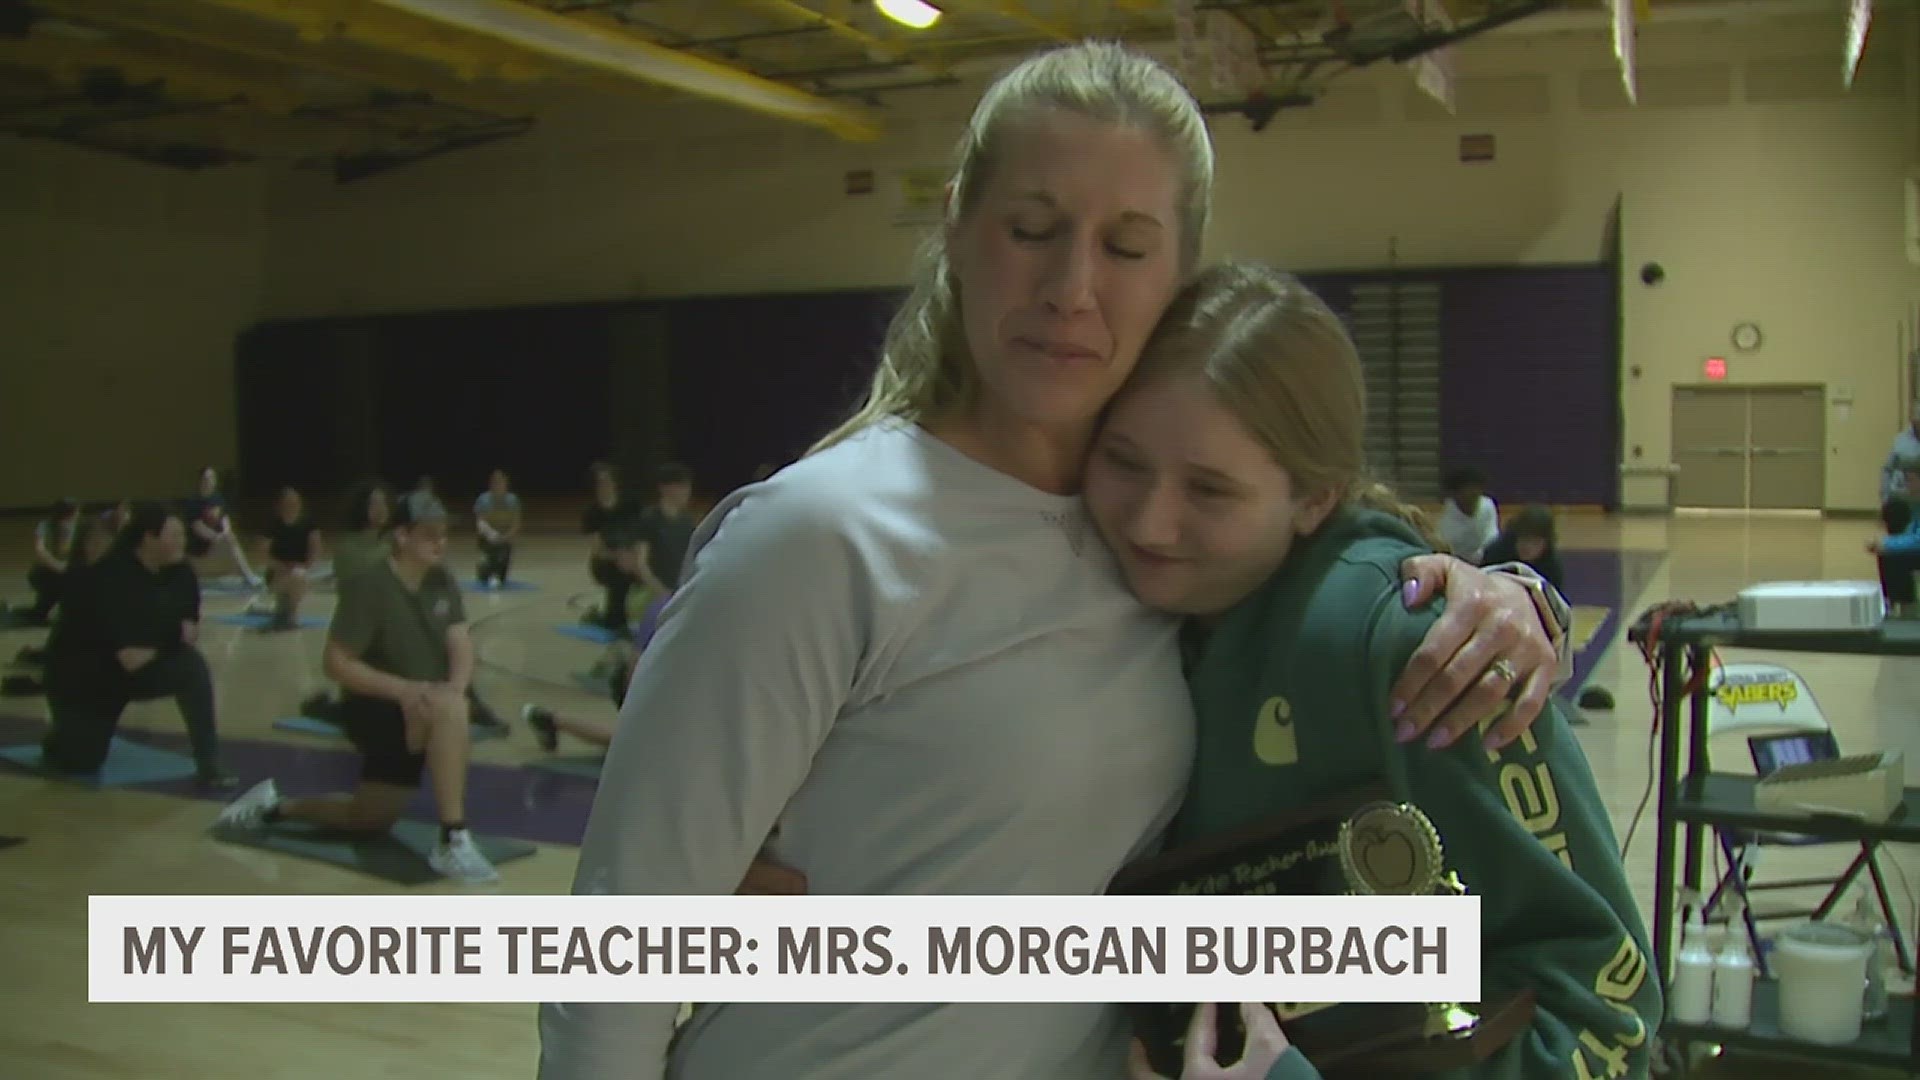 Mrs. Morgan Burbach has been teaching in DeWitt for 14 years. She's proud of helping her students succeed academically and personally outside the classroom.